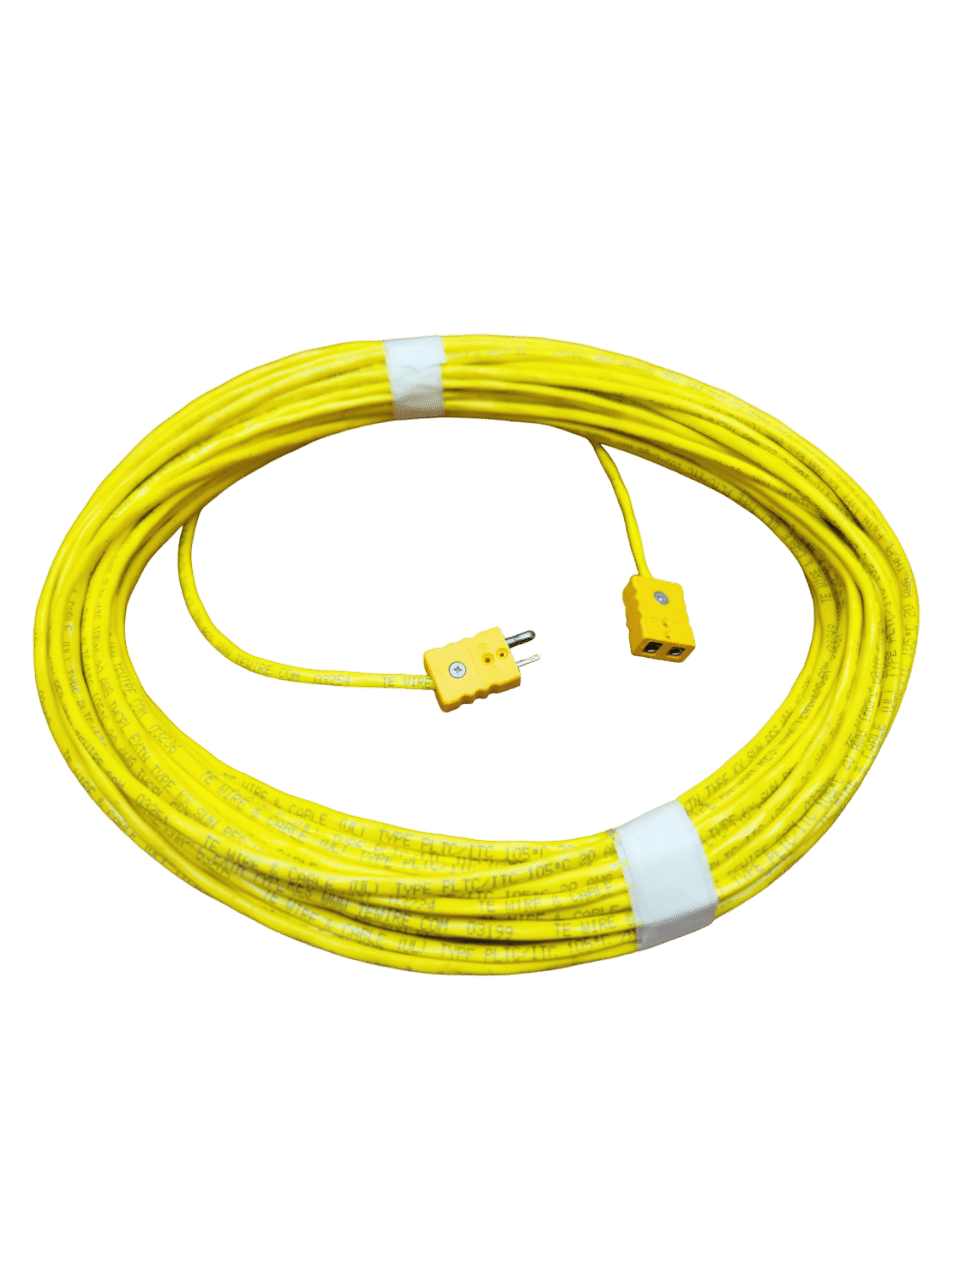 compensating-cable-34000